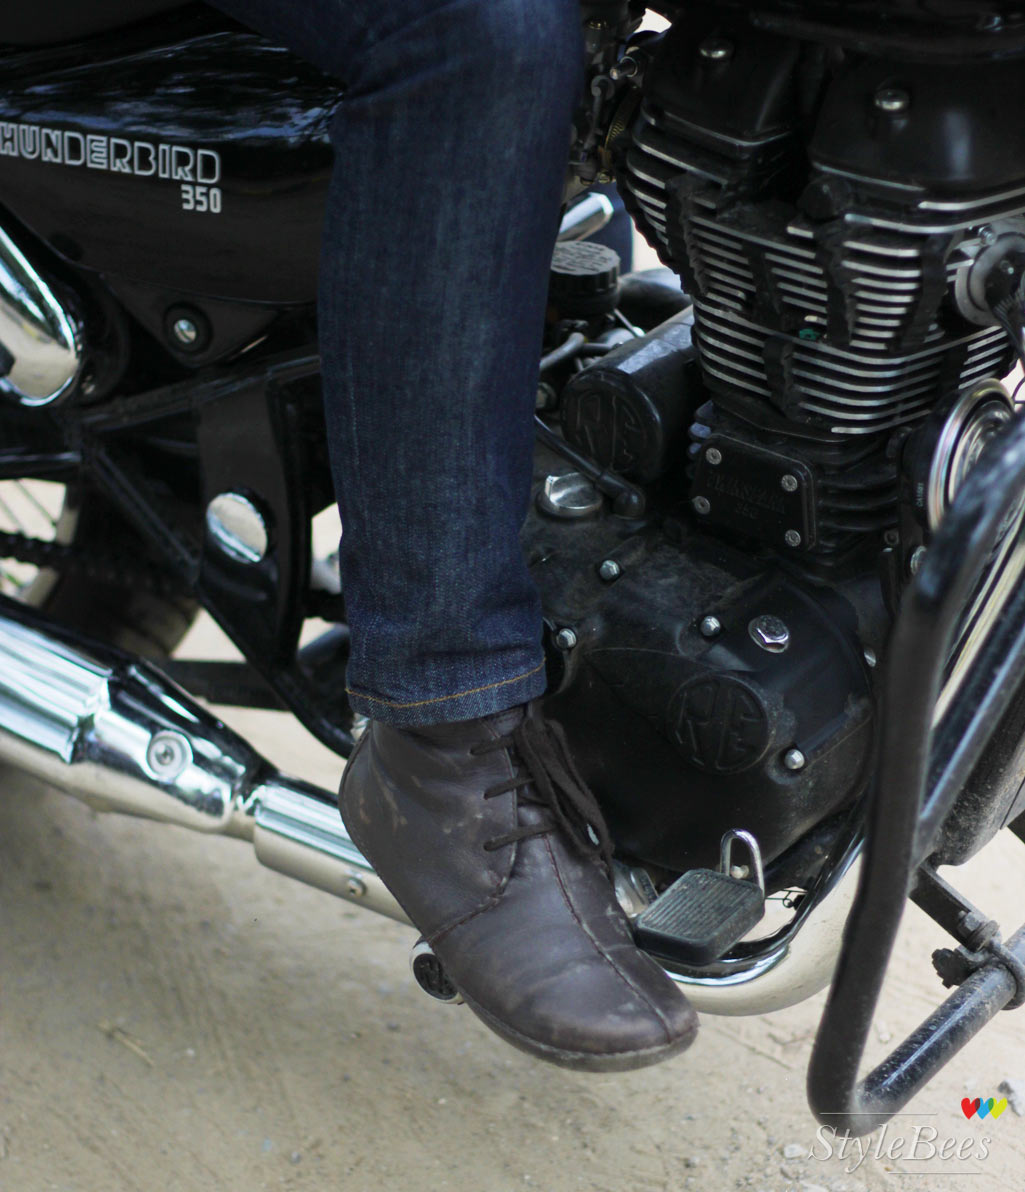 Photoshoot With My New Royal Enfield - Stylebees.com